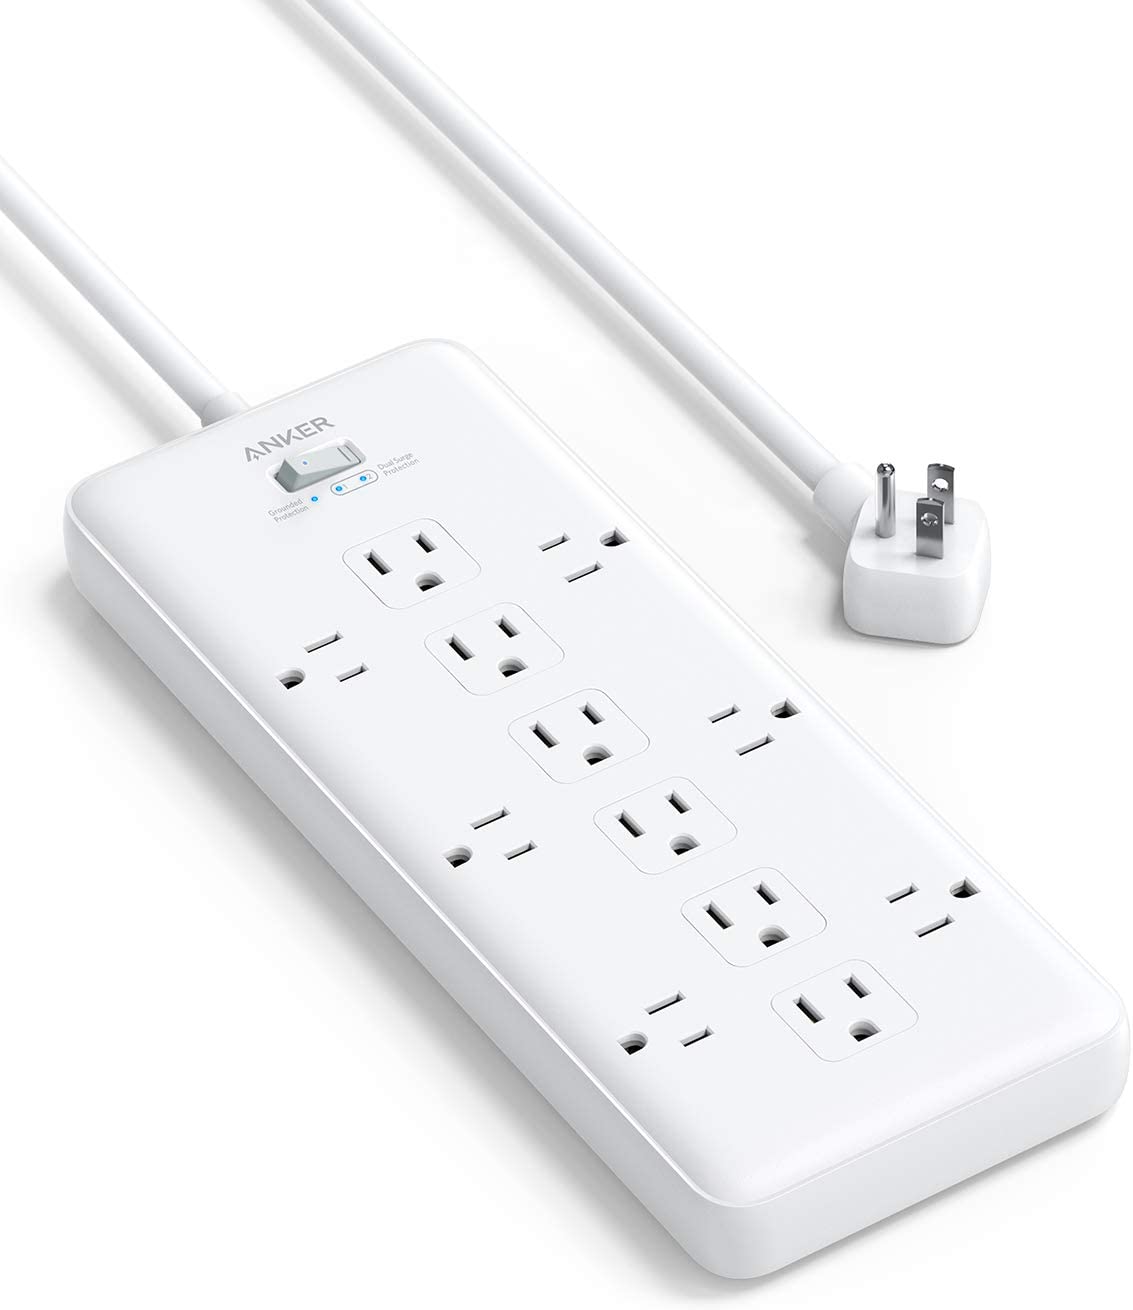 Anker 12-Outlet Power Strip Surge Protector 9000J w/ 6-Ft Cord (White) $19 + Free Shipping